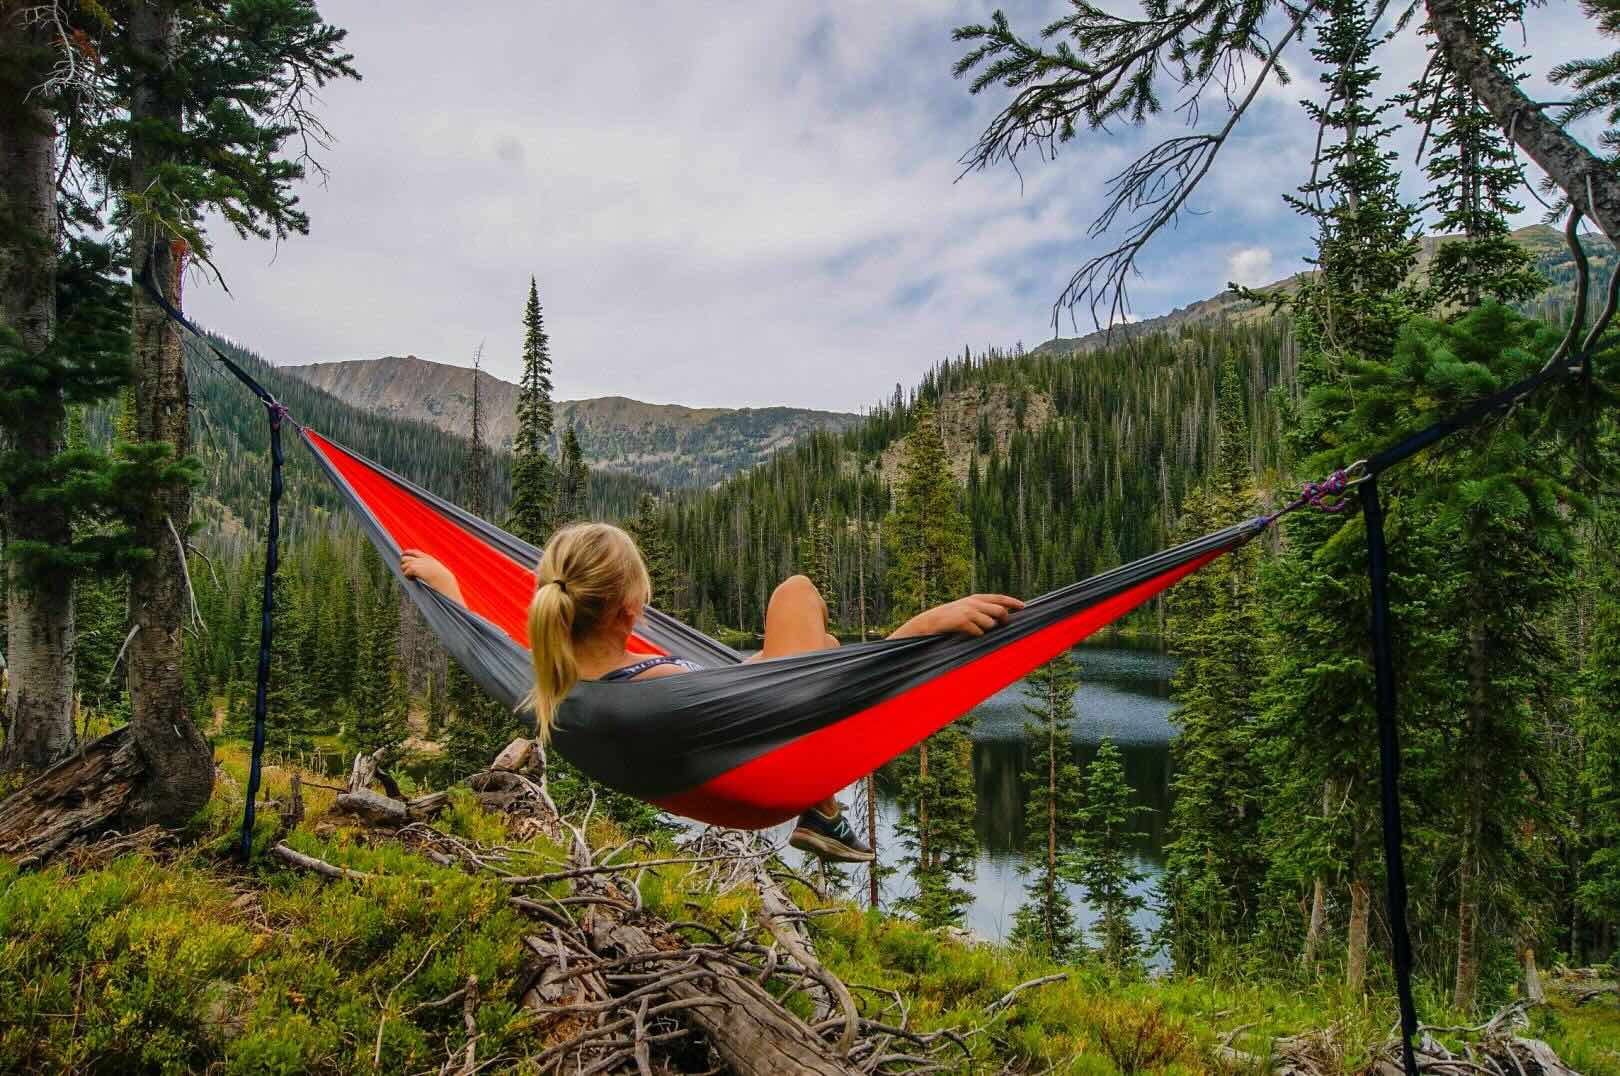 Hammock Review: The Perfect Outdoor Relaxation Solution